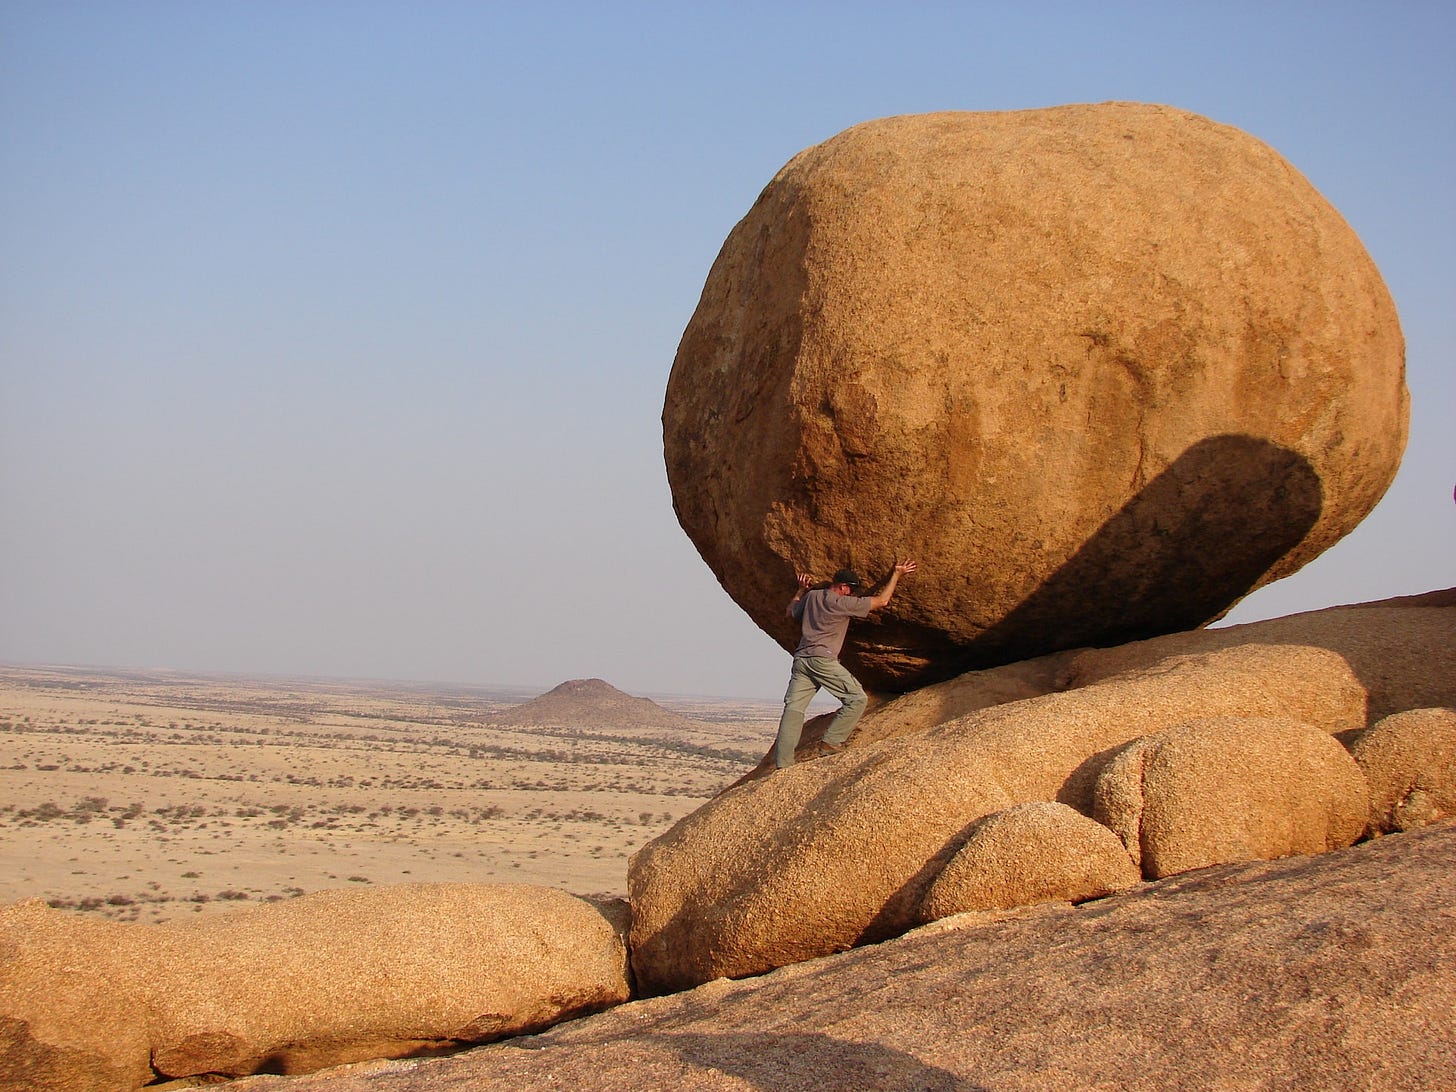 Man in the desert trying to move a massive rock 50 times bigger than him